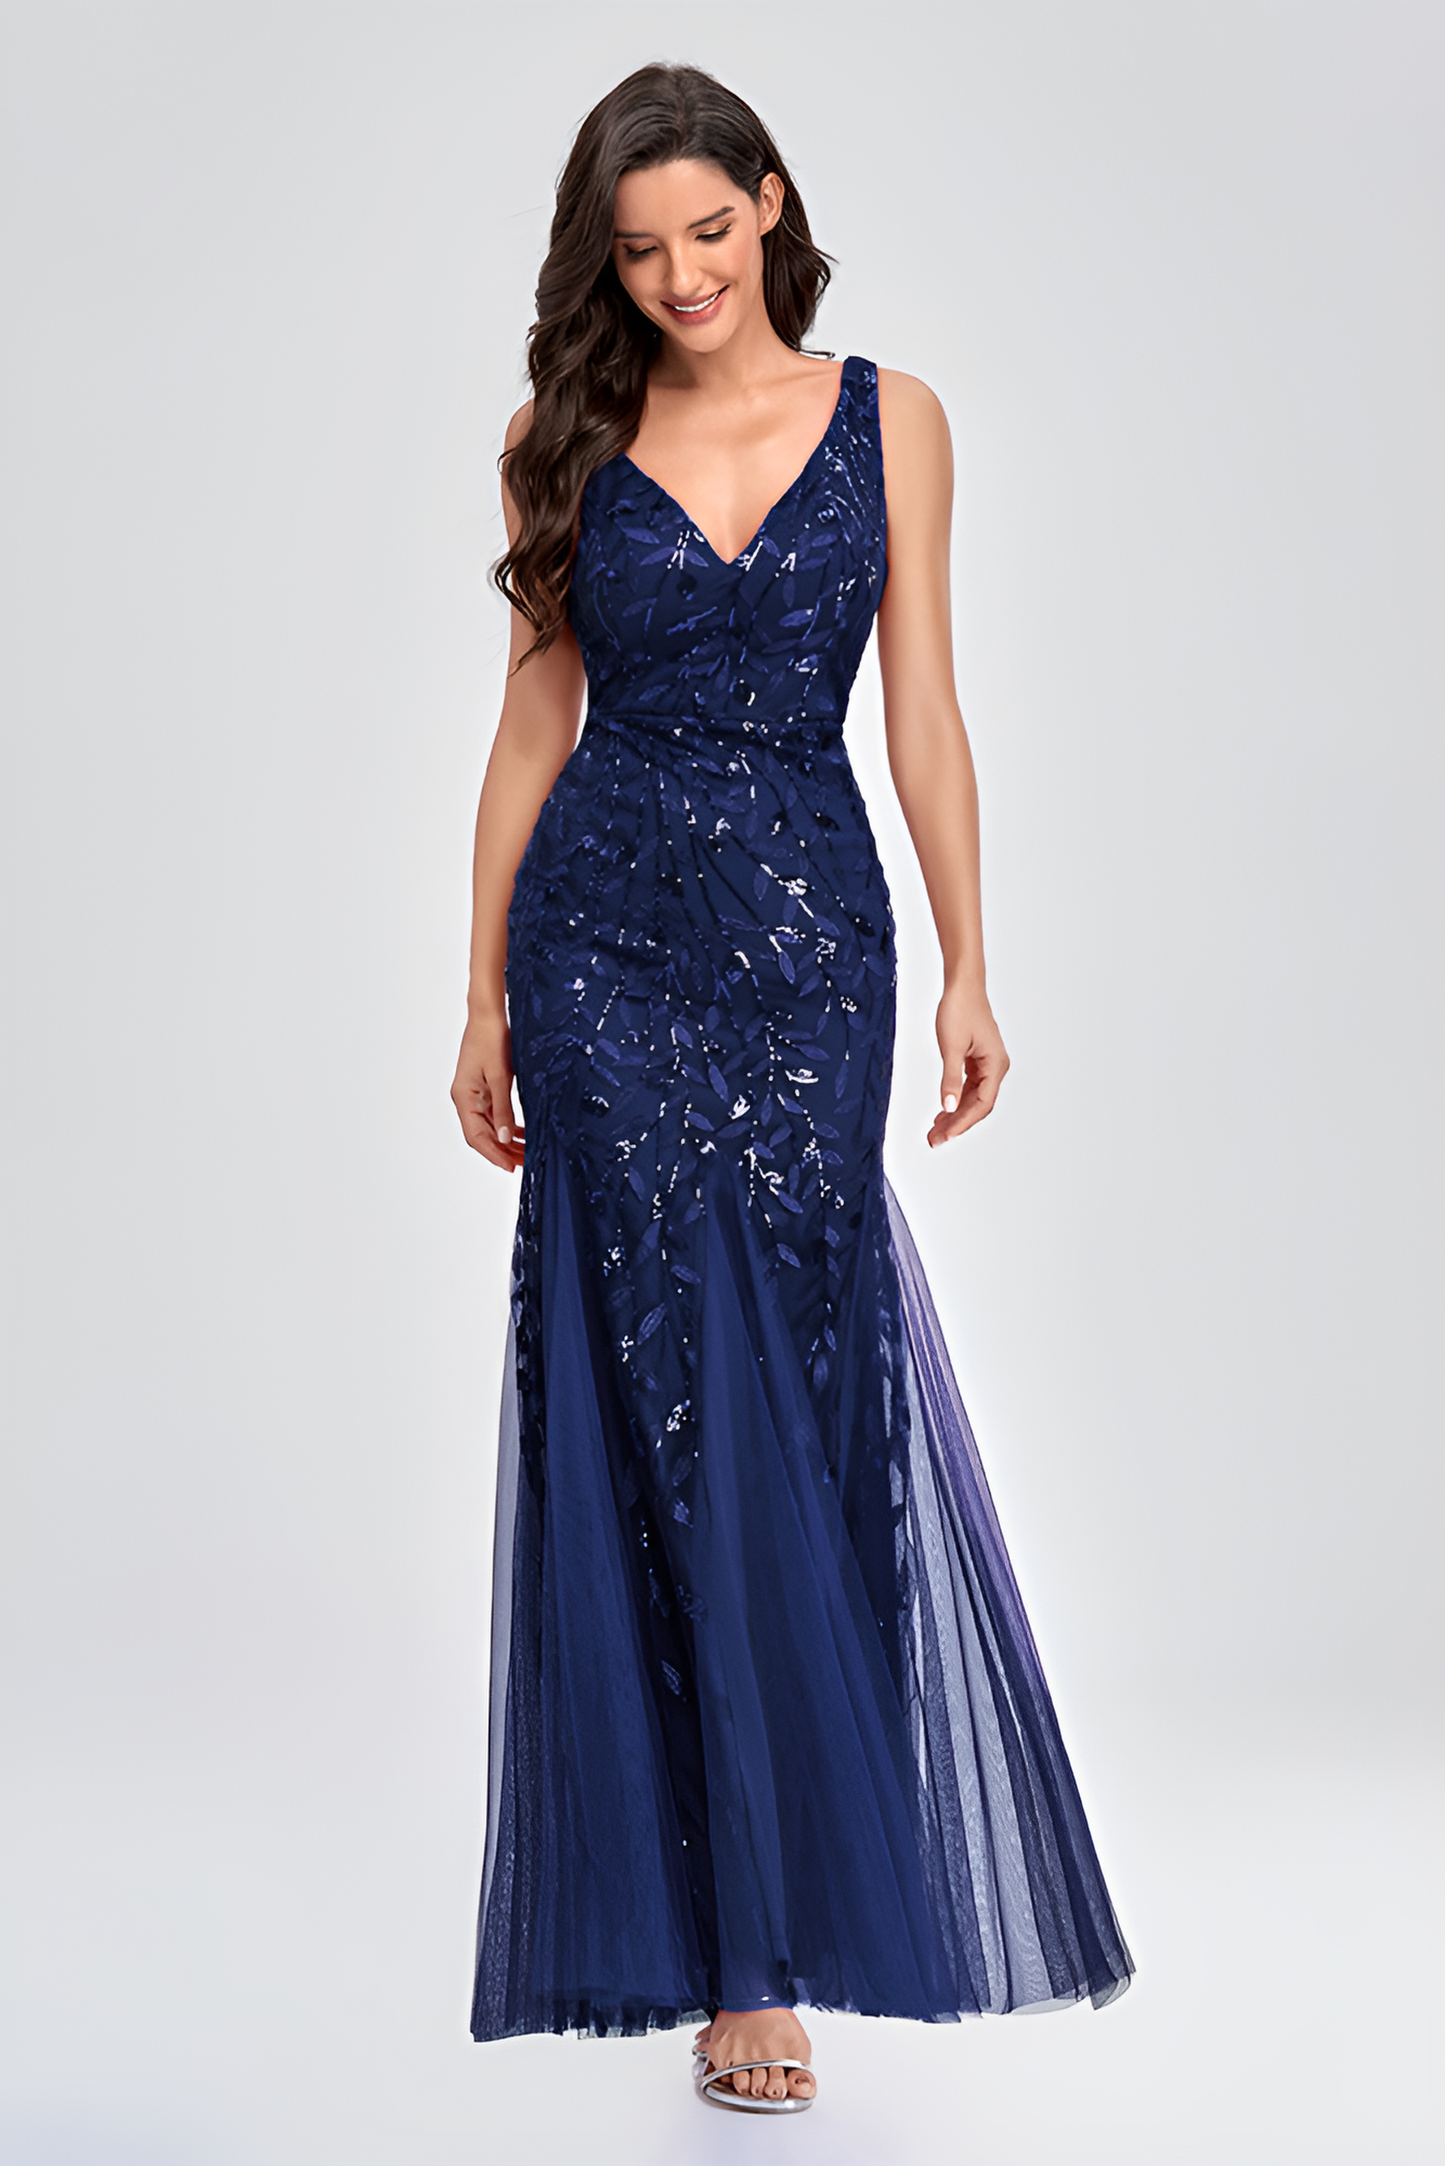 Sisakphoto™-Evening dress v-neck tulle embroidered sequin sexy mermaid ball gown